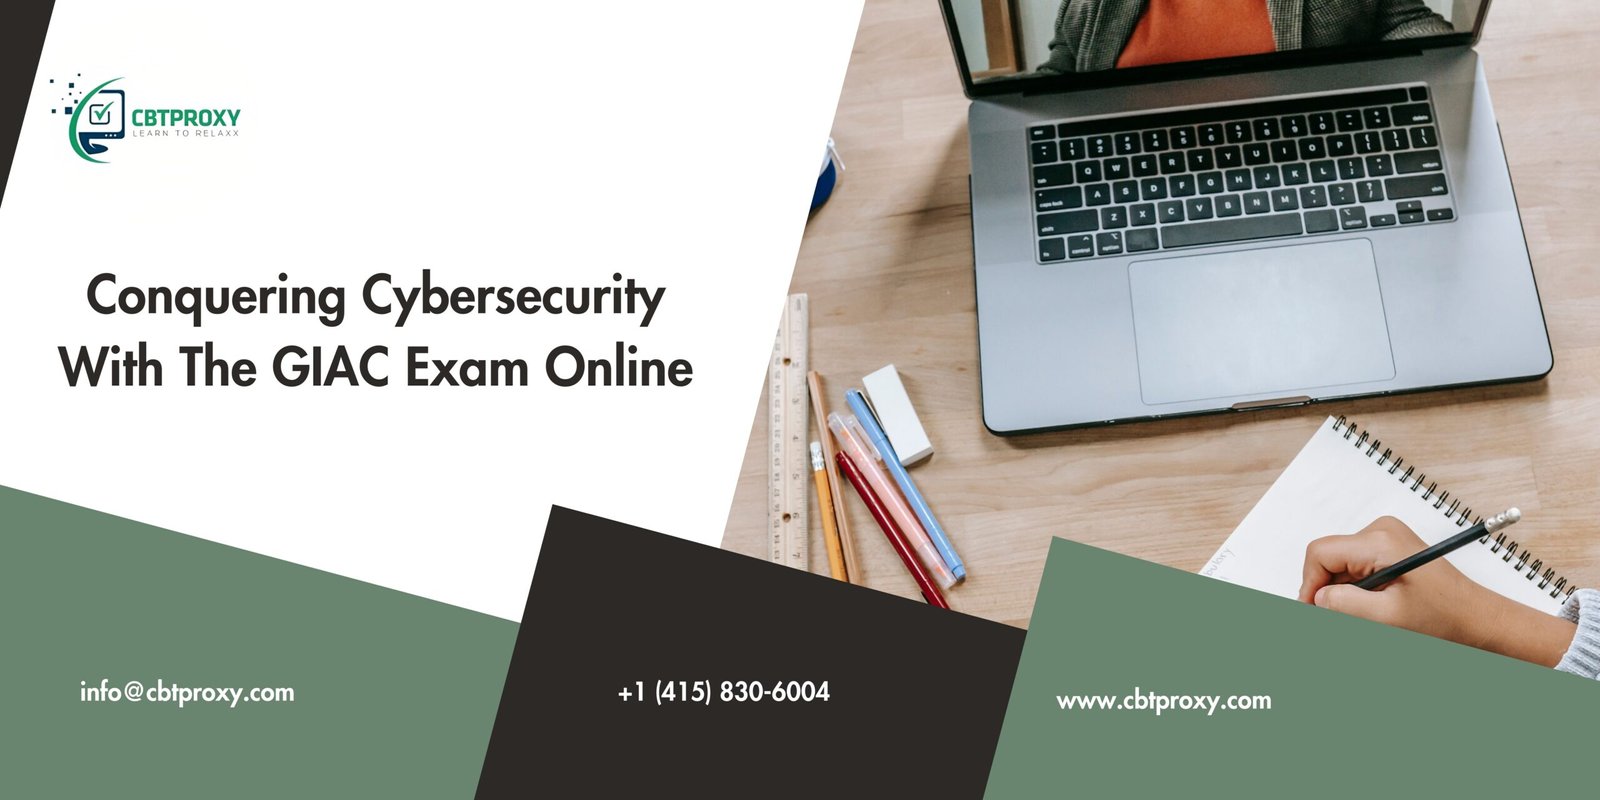 Conquering Cybersecurity With The GIAC Exam Online